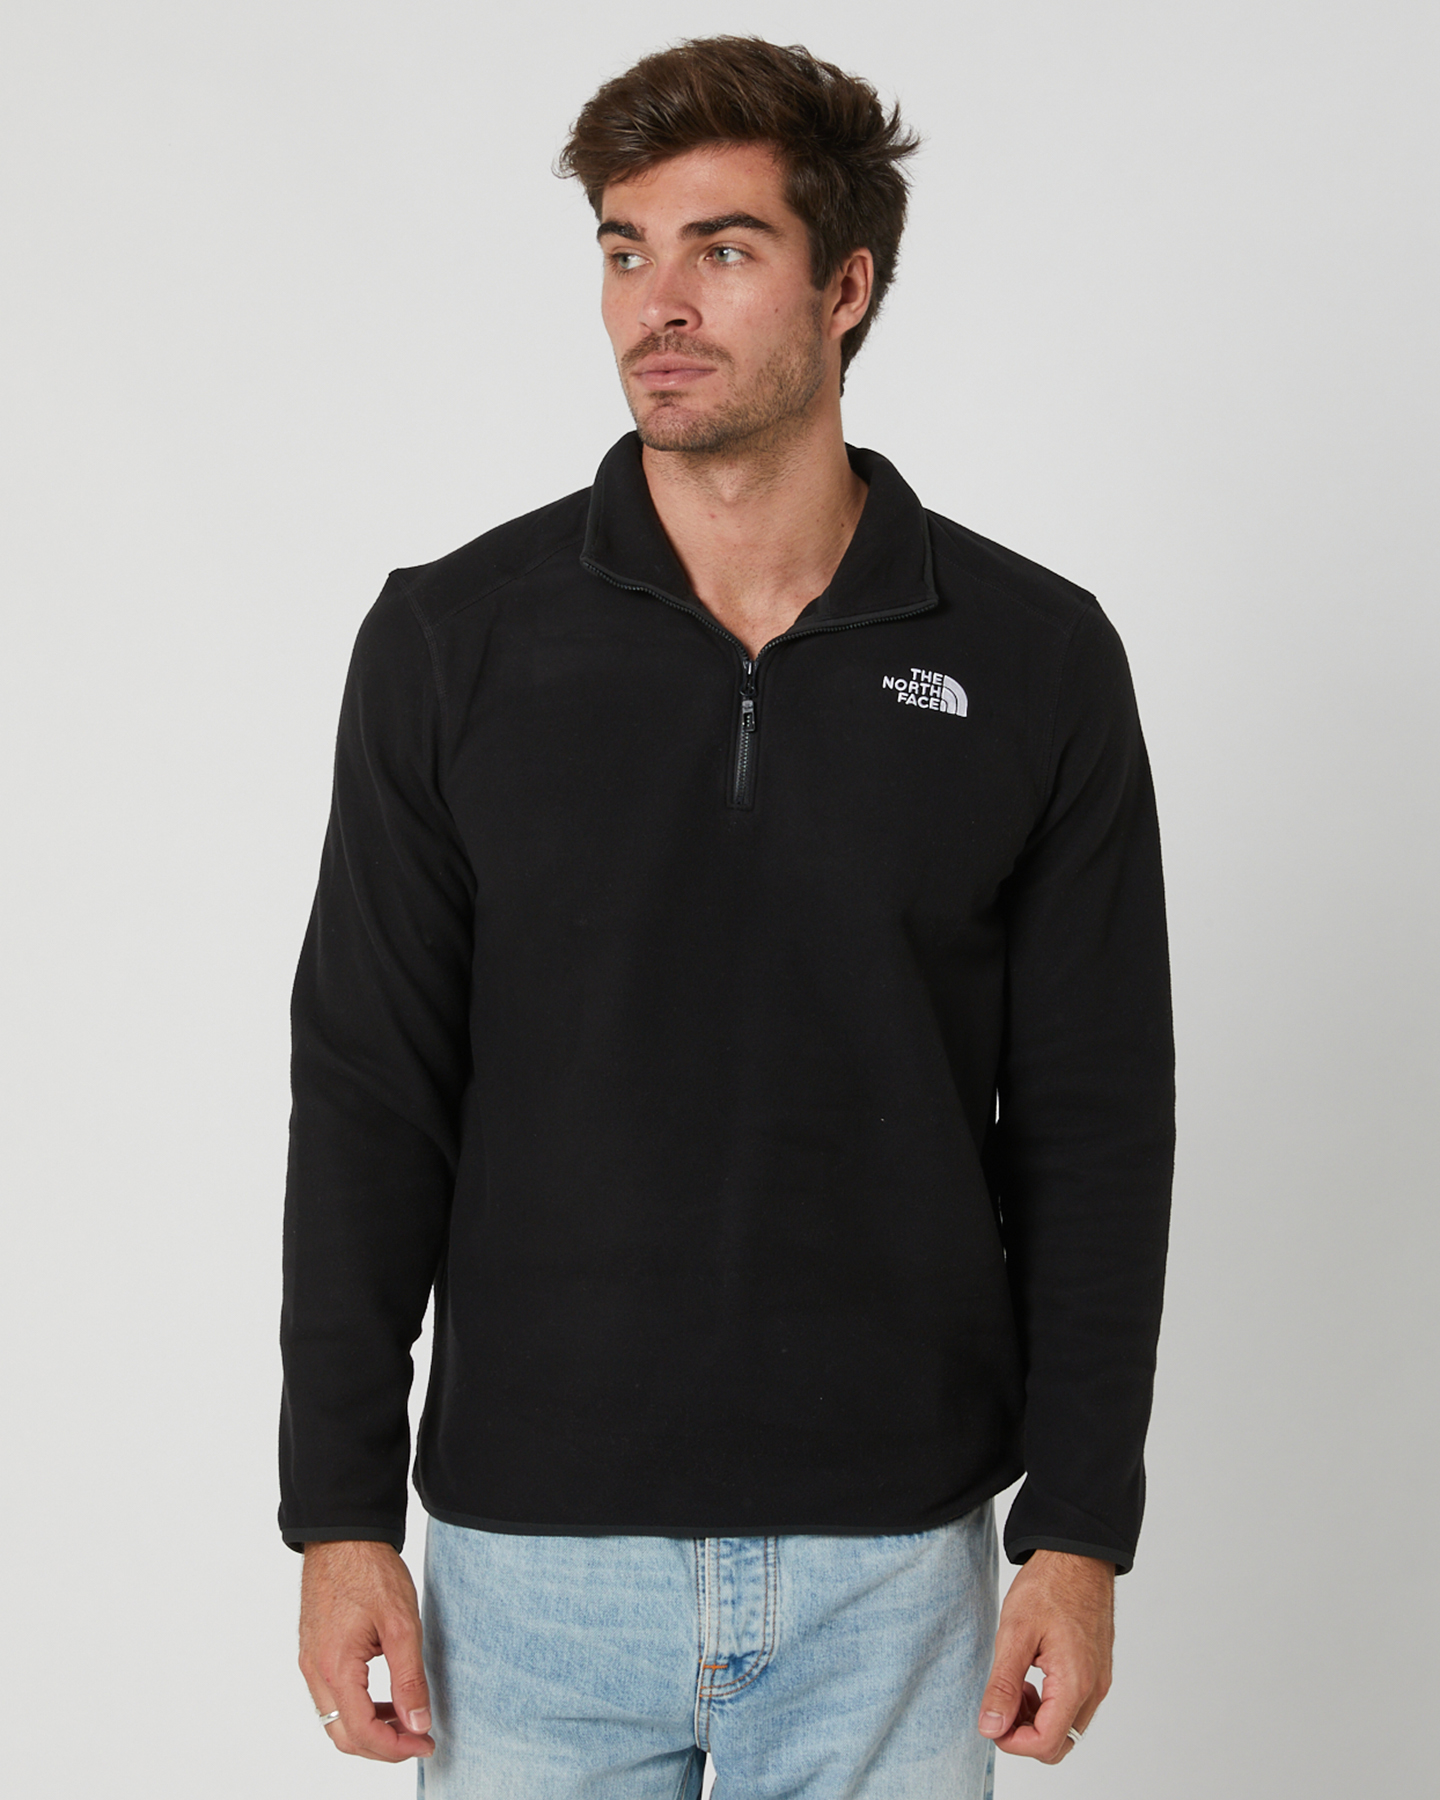 https://www.surfstitch.com/on/demandware.static/-/Sites-ss-master-catalog/default/dw96430a0b/images/NF0A855WJK3/TNF-BLACK-MENS-CLOTHING-THE-NORTH-FACE-JUMPERS-HOODIES-NF0A855WJK3_1.JPG